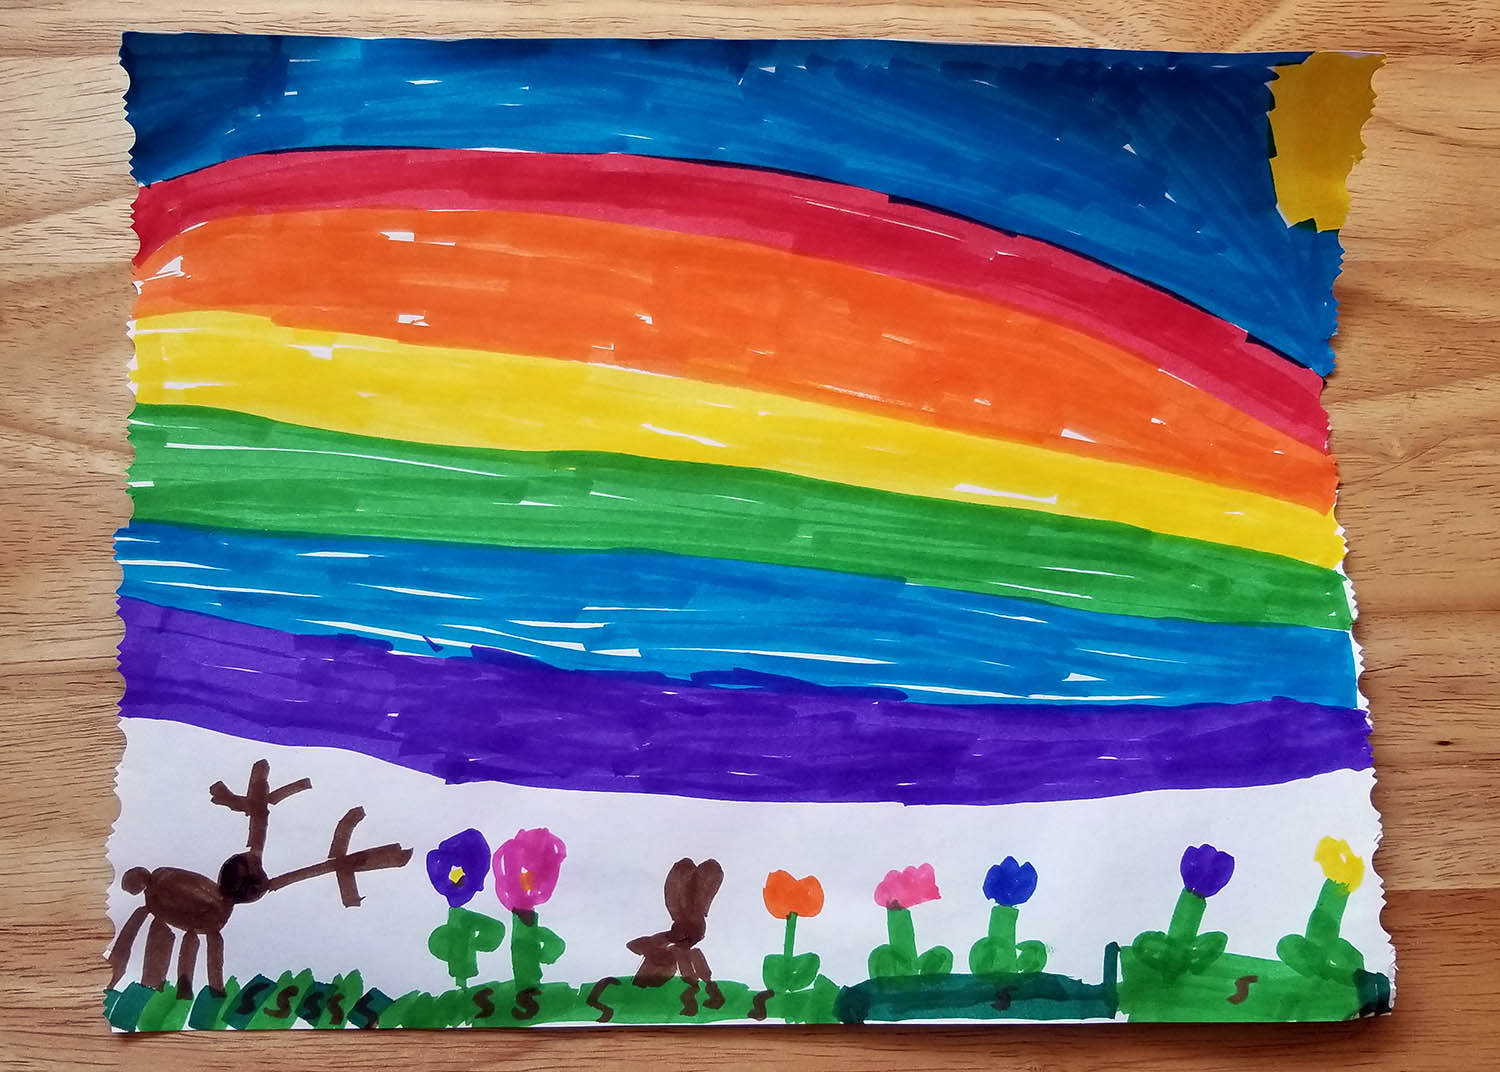 A child's drawing of a rainbow, flowers, and a deer